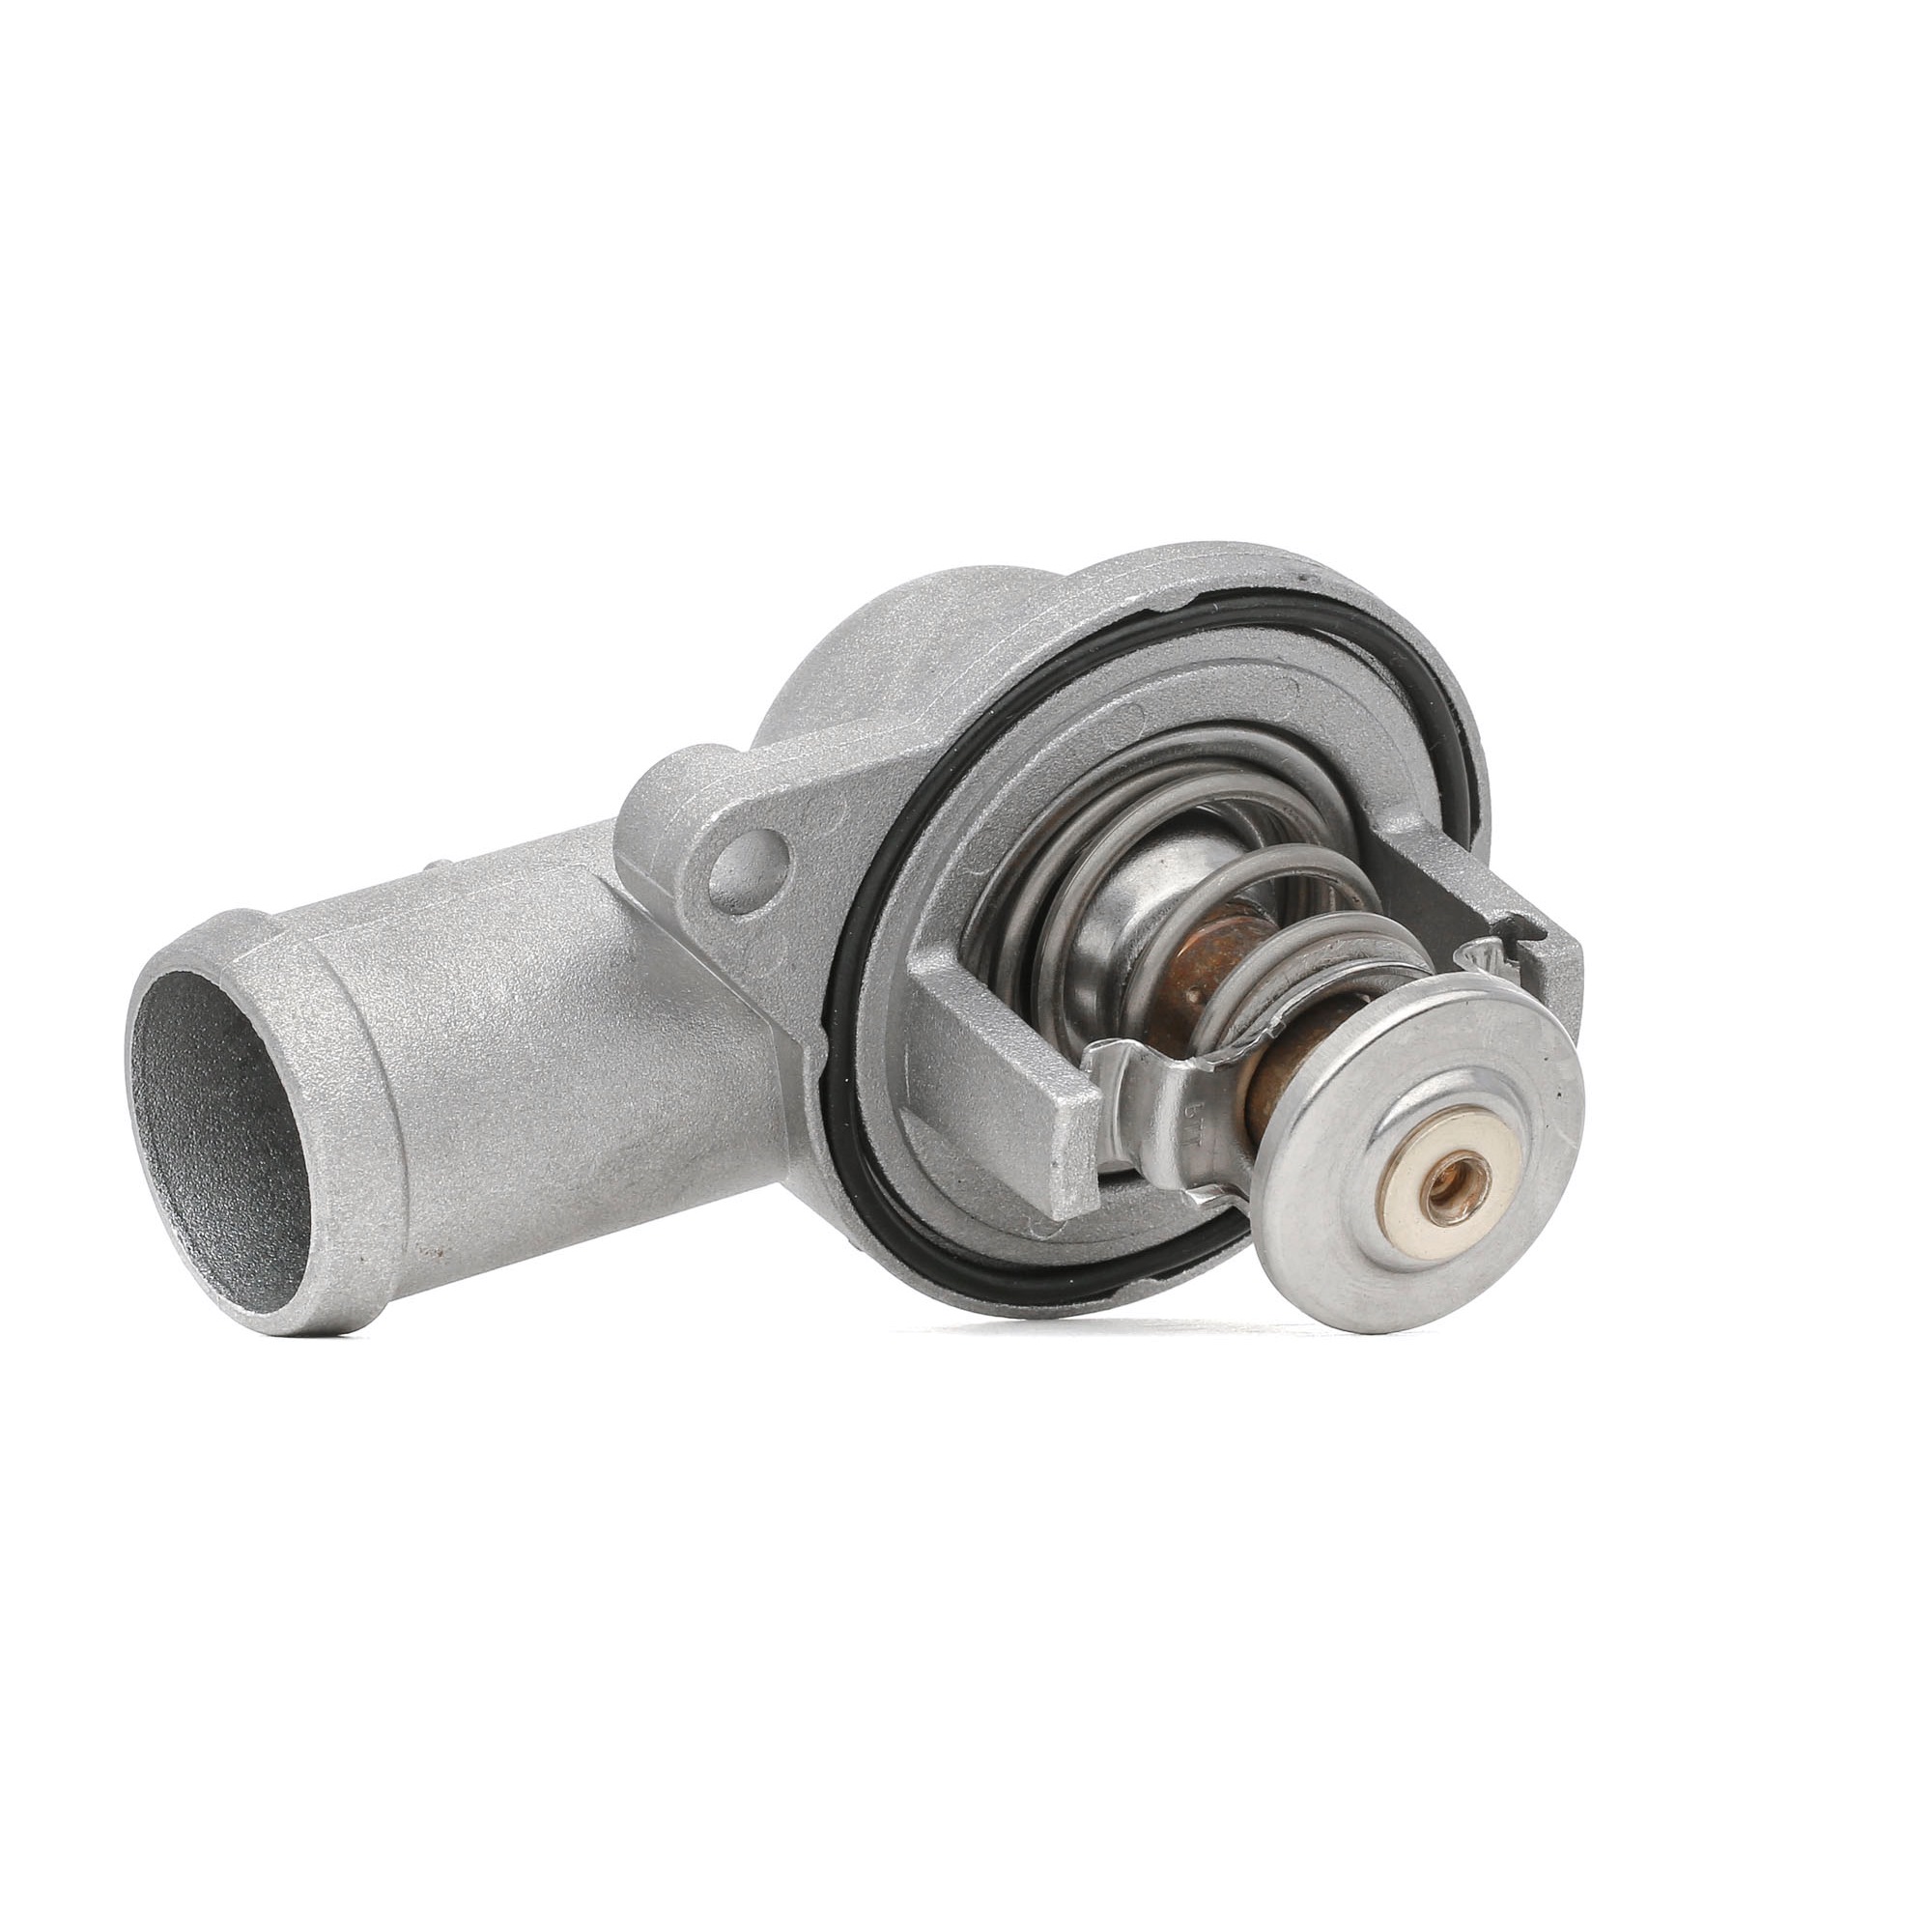 MAHLE ORIGINAL TI 212 87D Engine thermostat Opening Temperature: 87°C, with seal